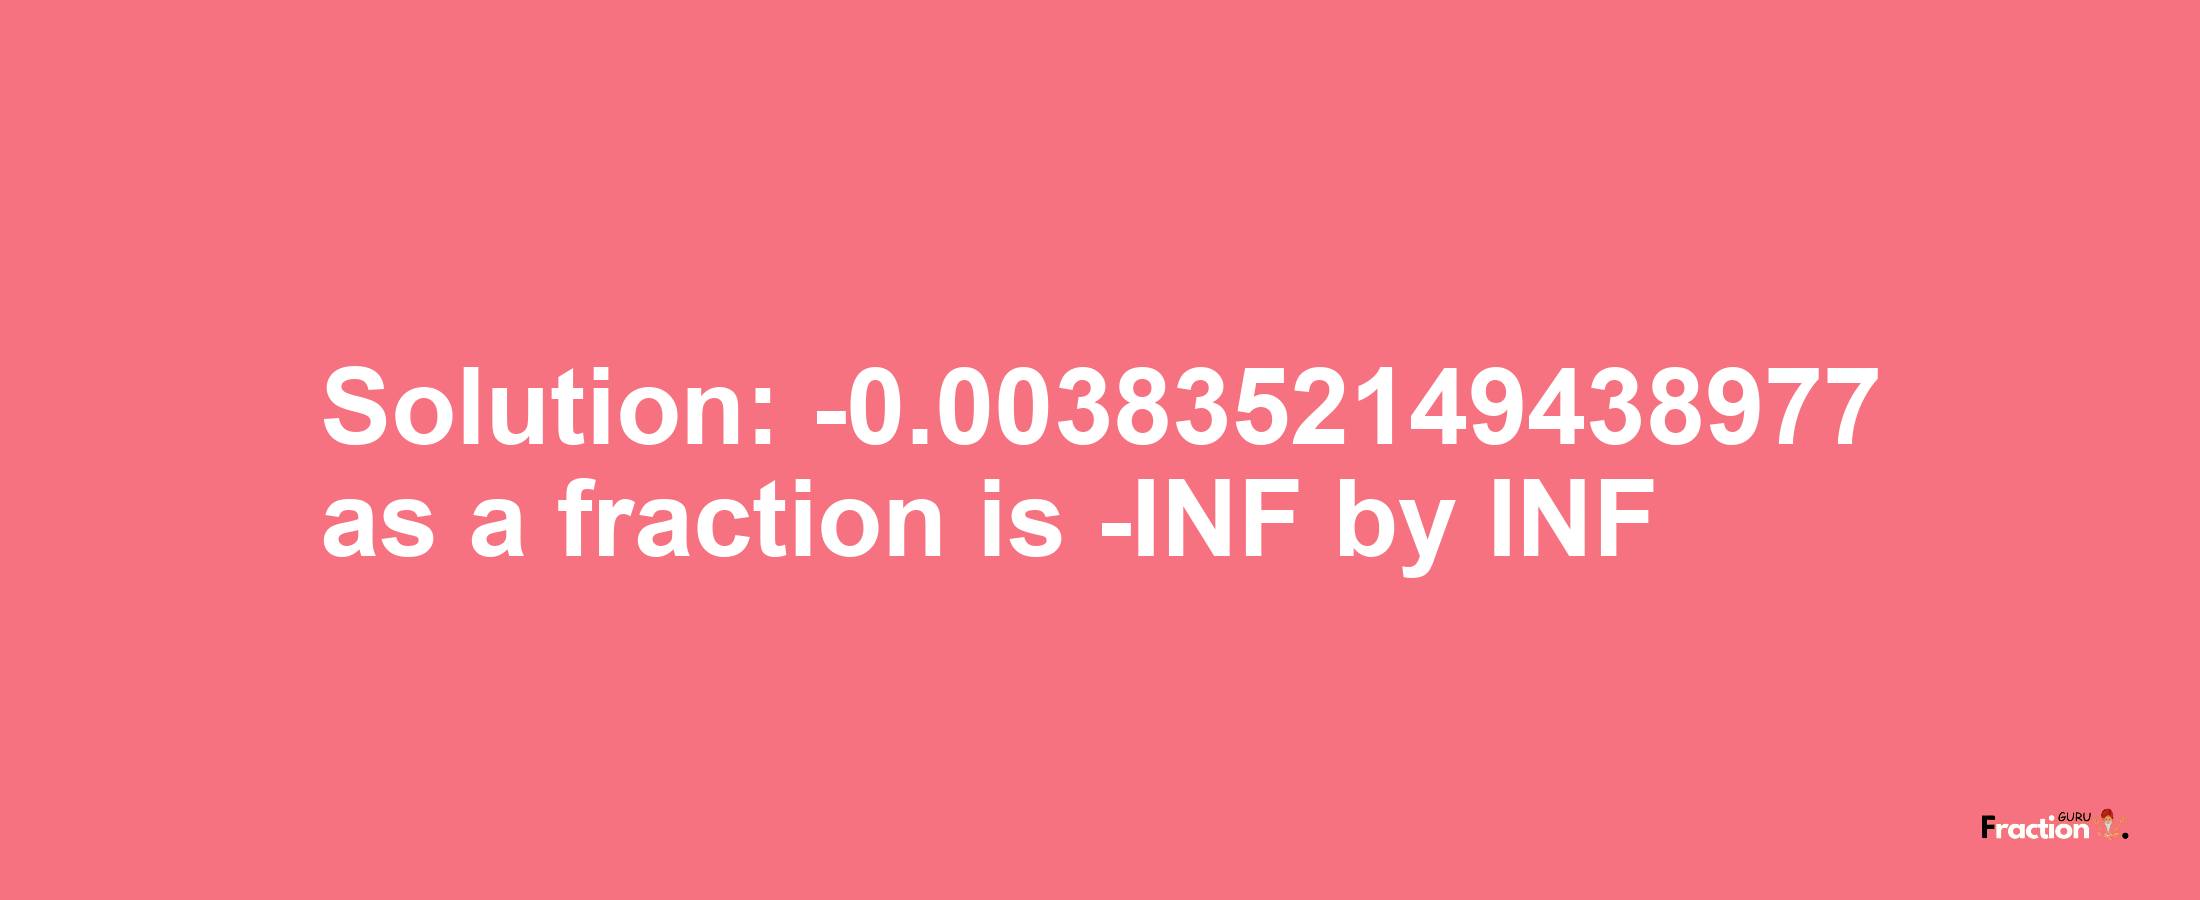 Solution:-0.0038352149438977 as a fraction is -INF/INF